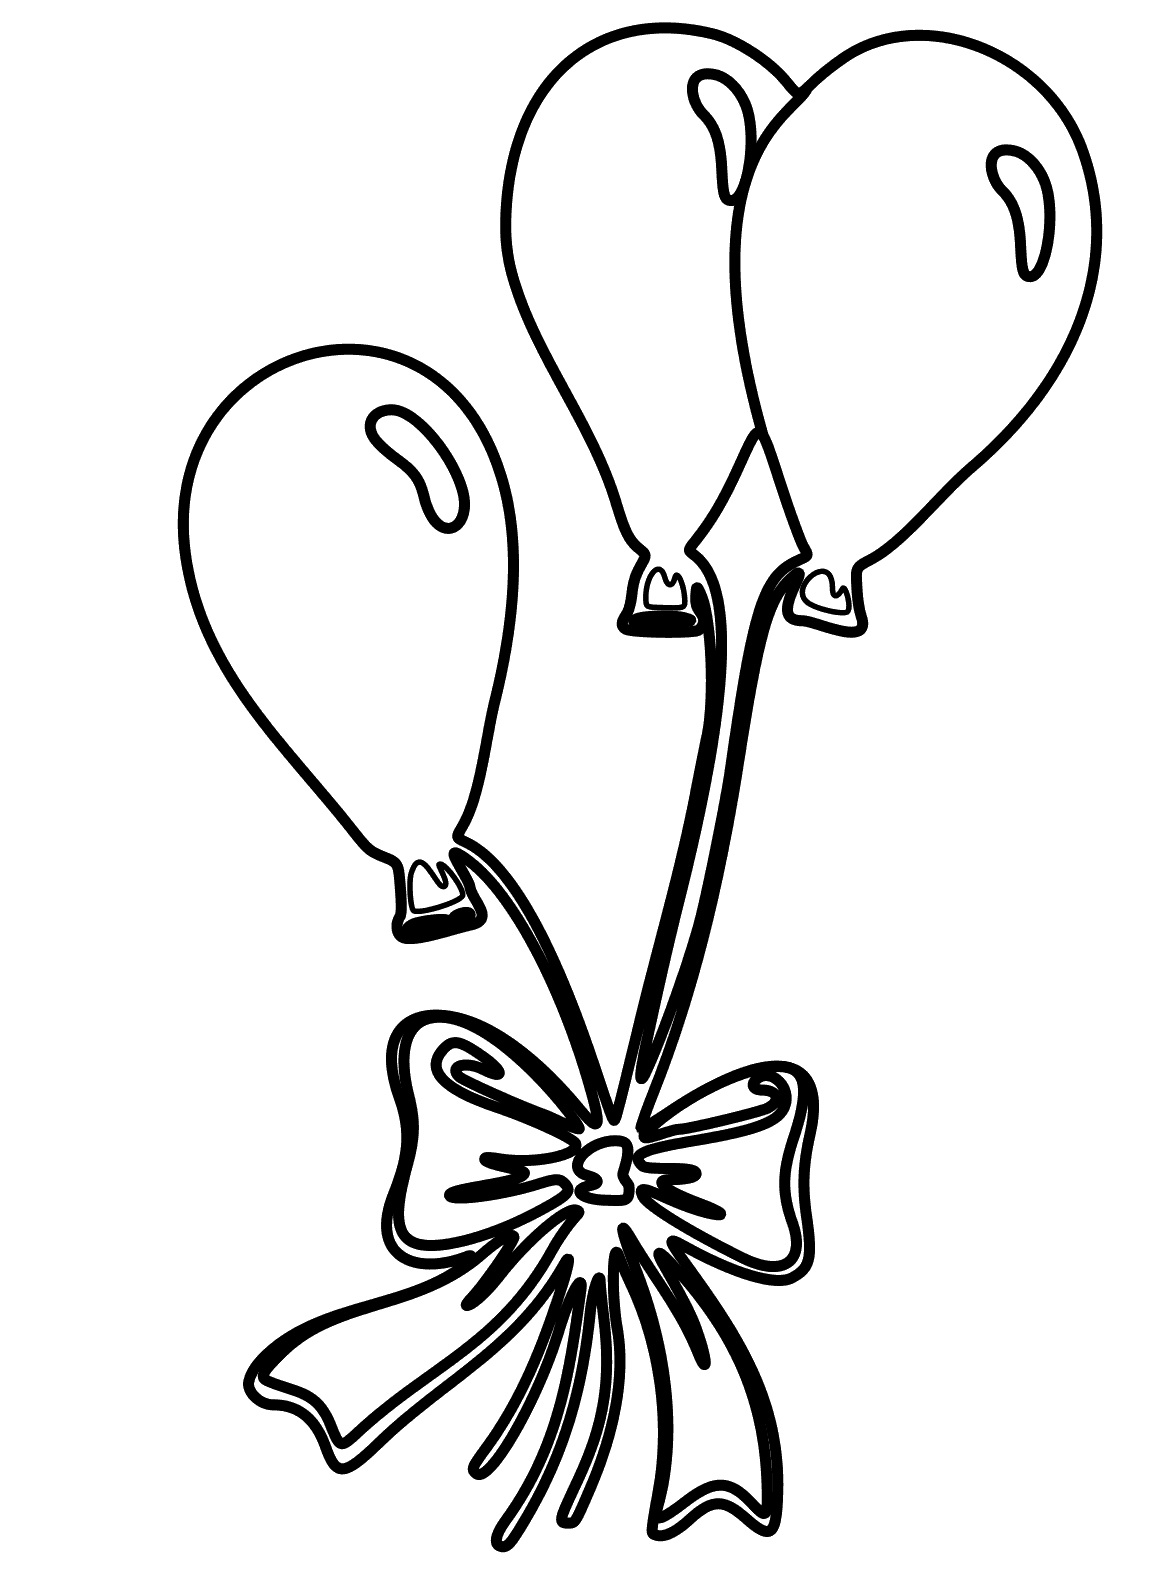 Balloon Coloring Pages Best Coloring Pages For Kids